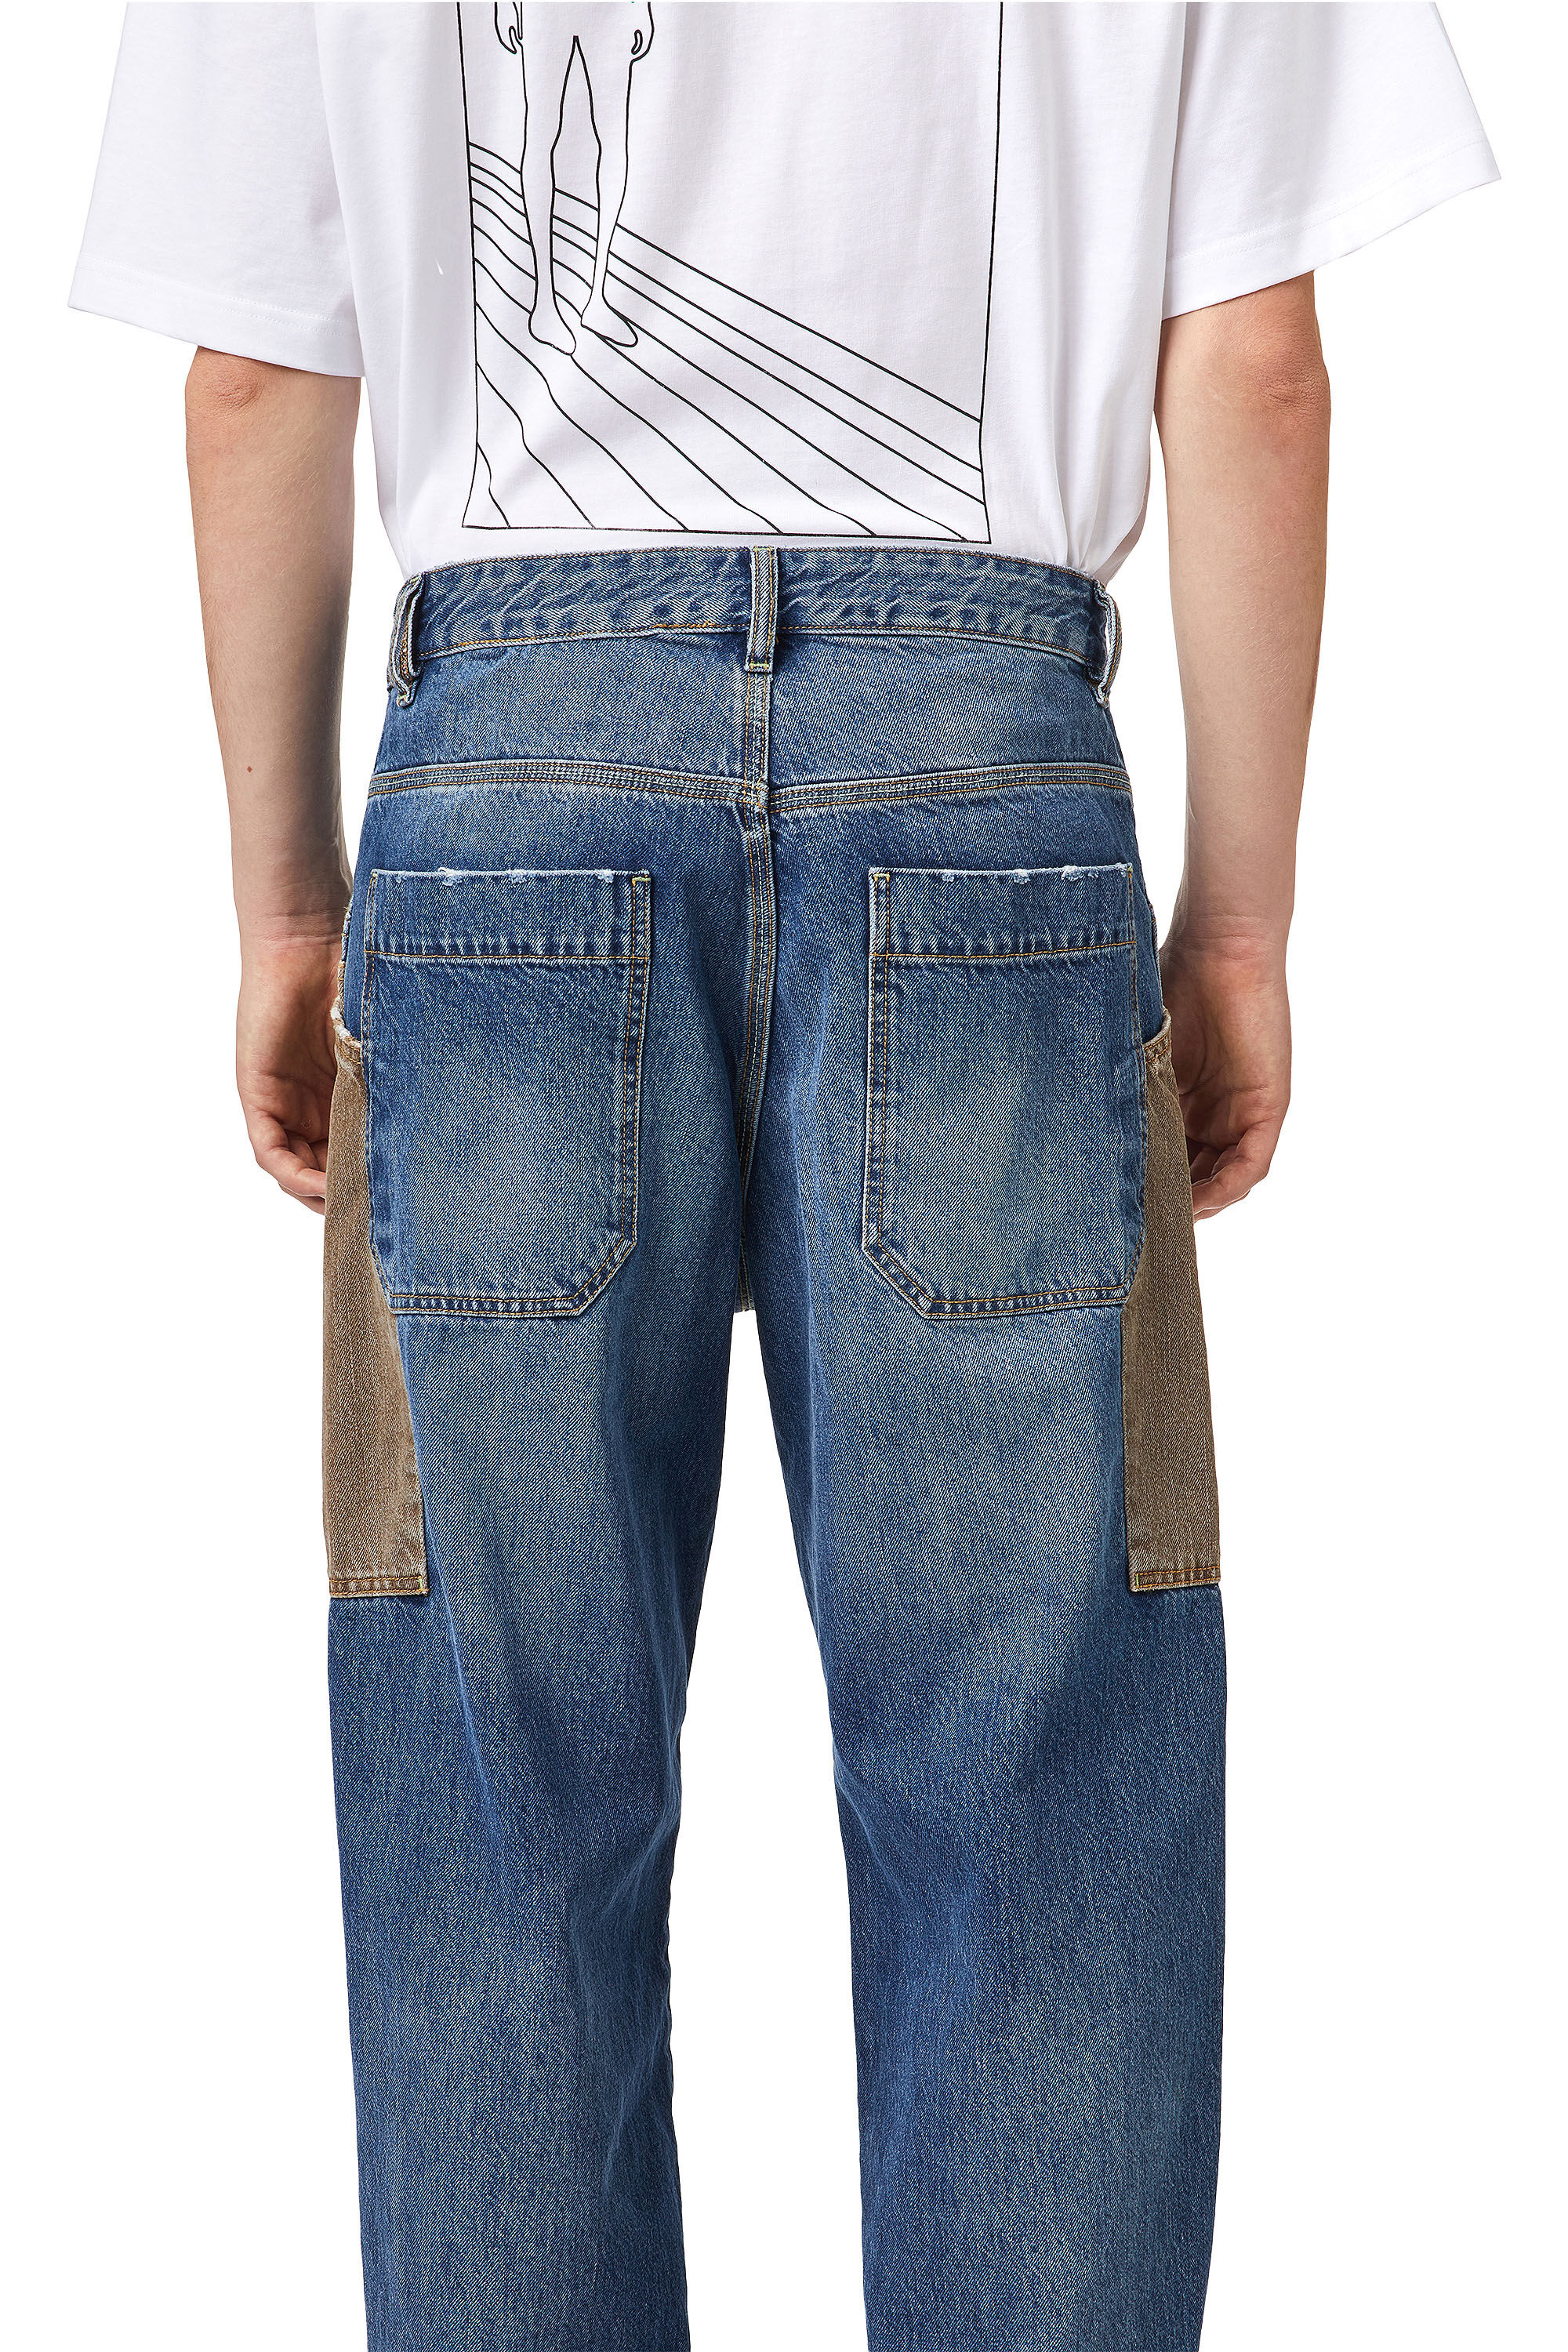 Diesel - D-Franky 0GCAY Straight Jeans,  - Image 6